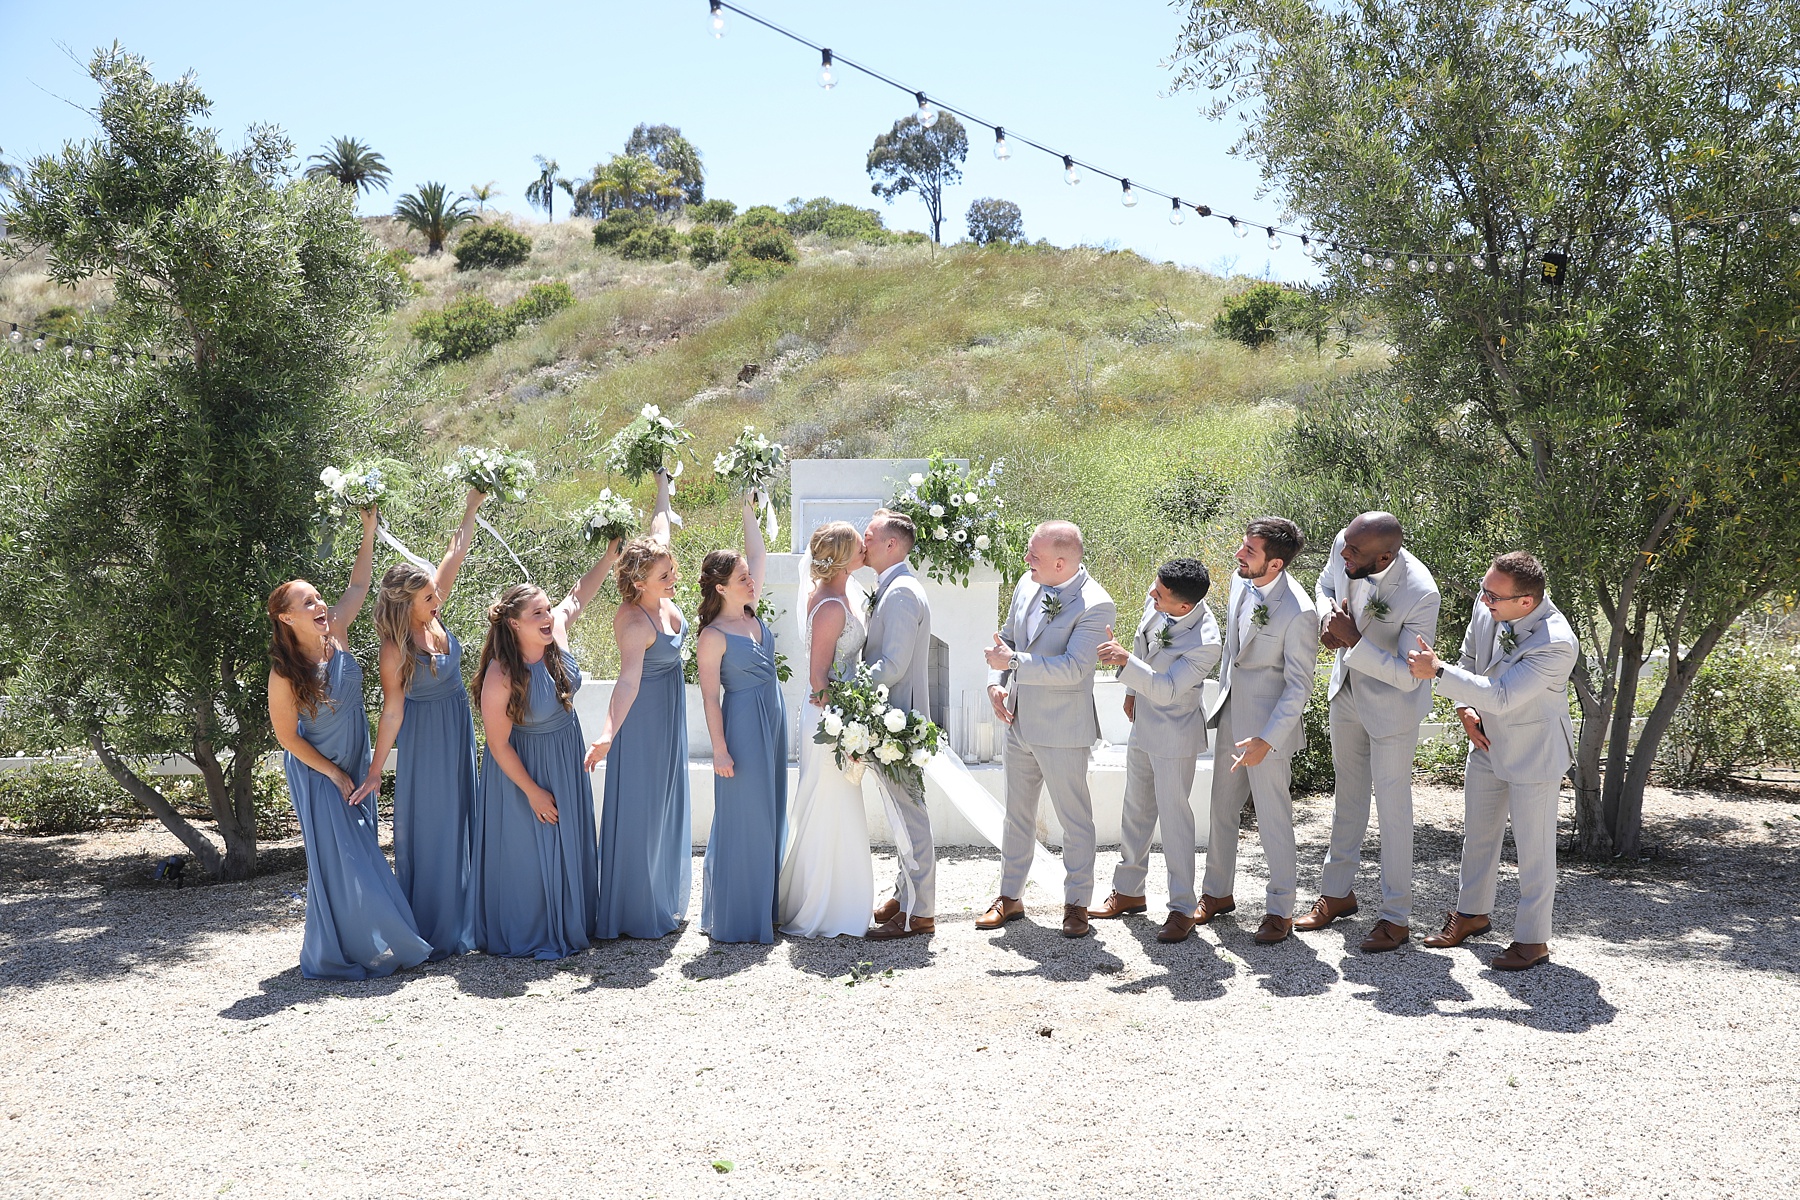 bridesmaids in blue gowns cheer while groomsmen in grey suits clap for bride and groom